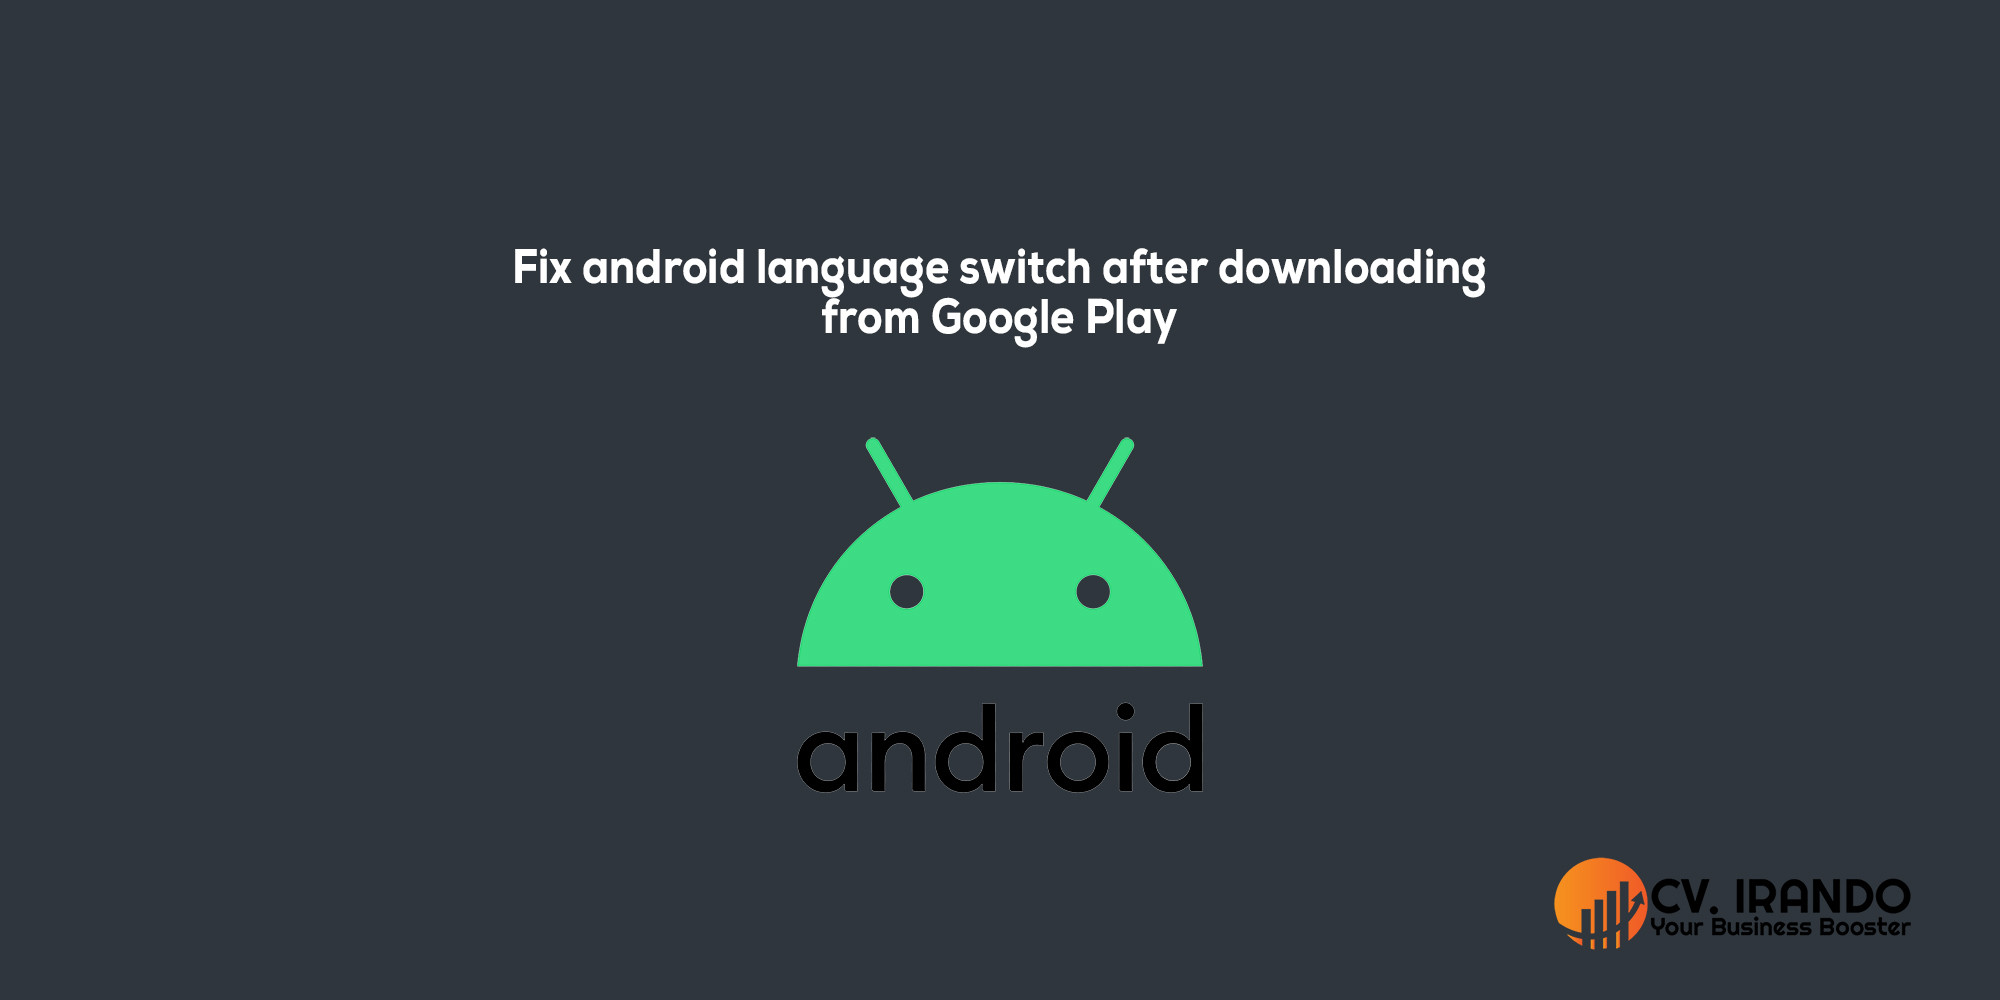 Fix android language switch after downloading from Google Play